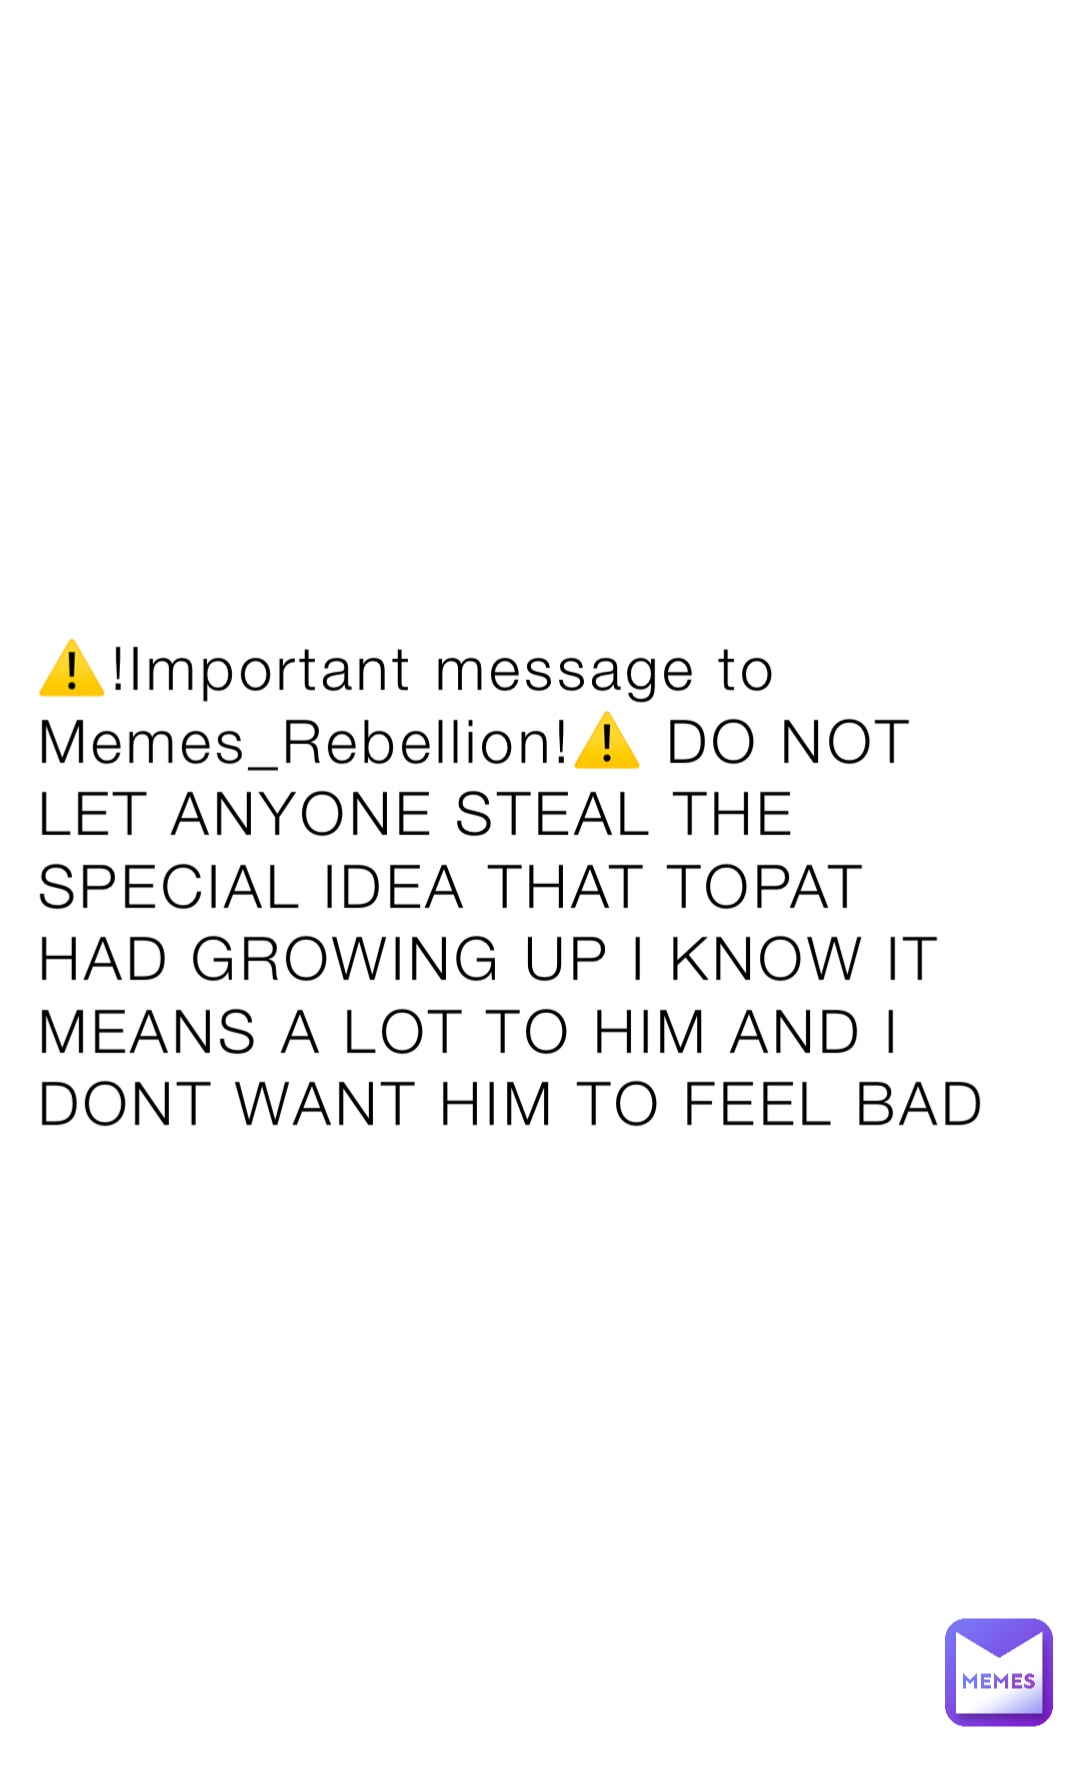 ⚠️!Important message to Memes_Rebellion!⚠️ DO NOT LET ANYONE STEAL THE SPECIAL IDEA THAT TOPAT HAD GROWING UP I KNOW IT MEANS A LOT TO HIM AND I DONT WANT HIM TO FEEL BAD